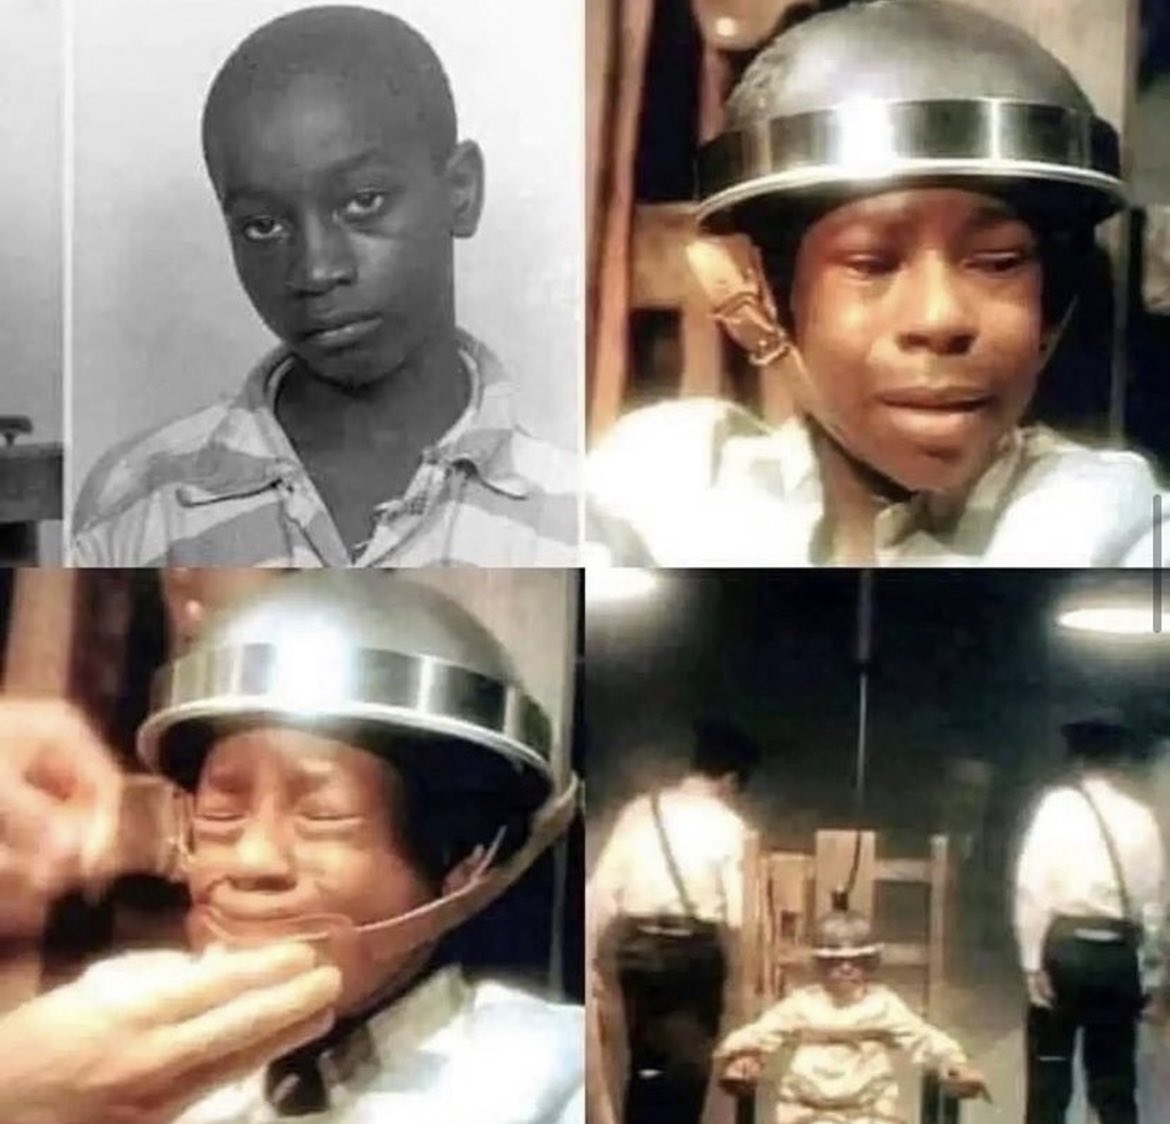 Unveiling a Tragic Injustice: Meet George Stinney Jr., an innocent life taken by the U.S. at the tender age of 14